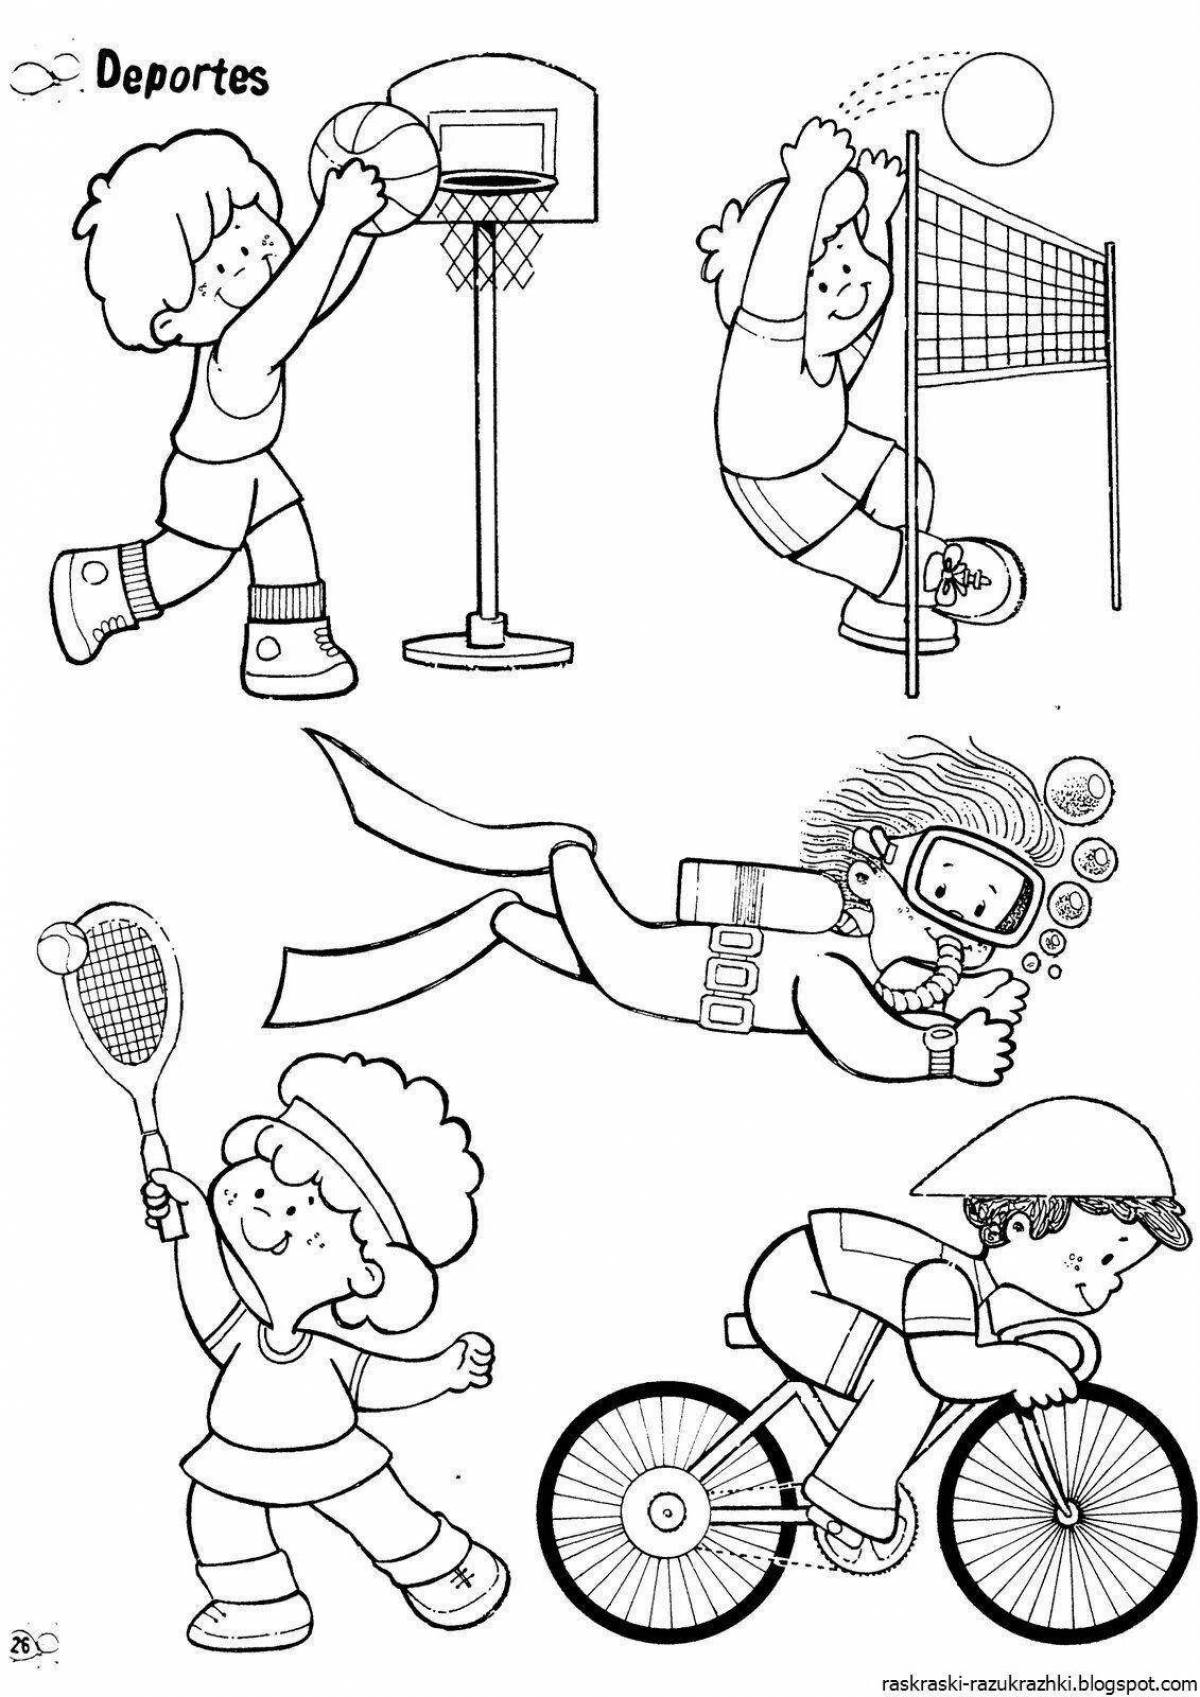 Attractive lifestyle coloring page